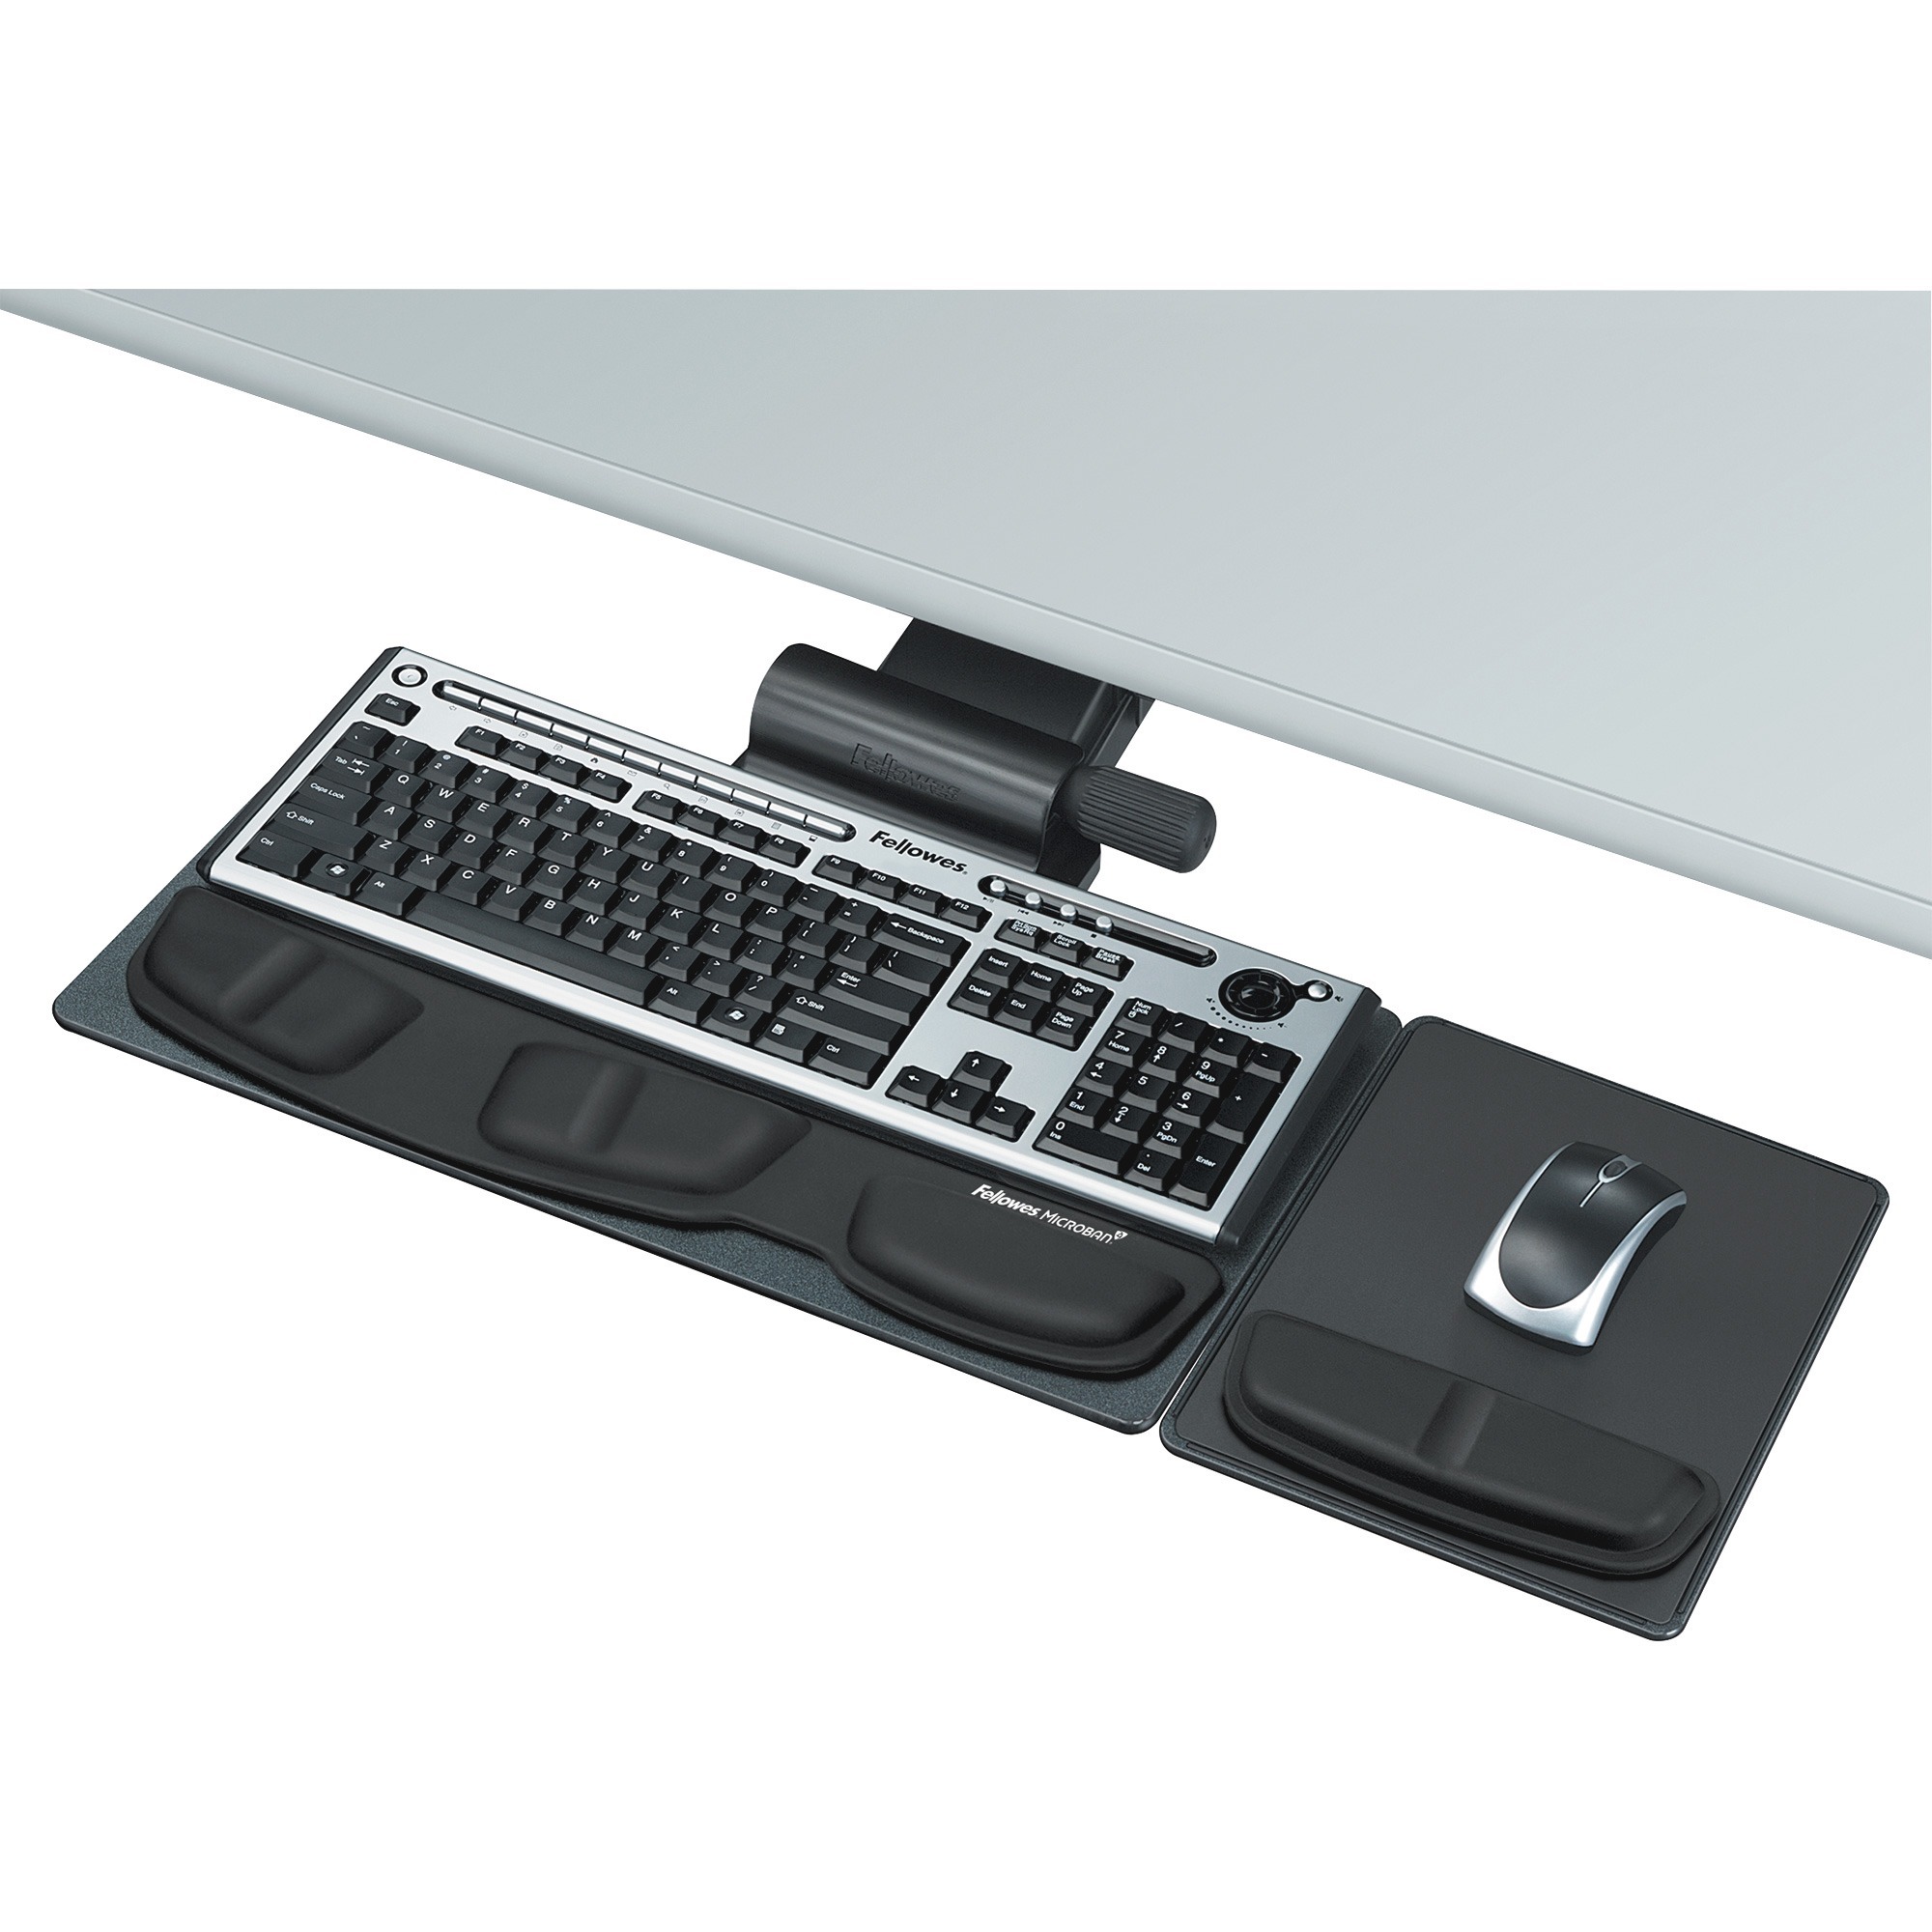 Fellowes Professional Series Premier Keyboard Tray, Black - image 1 of 3